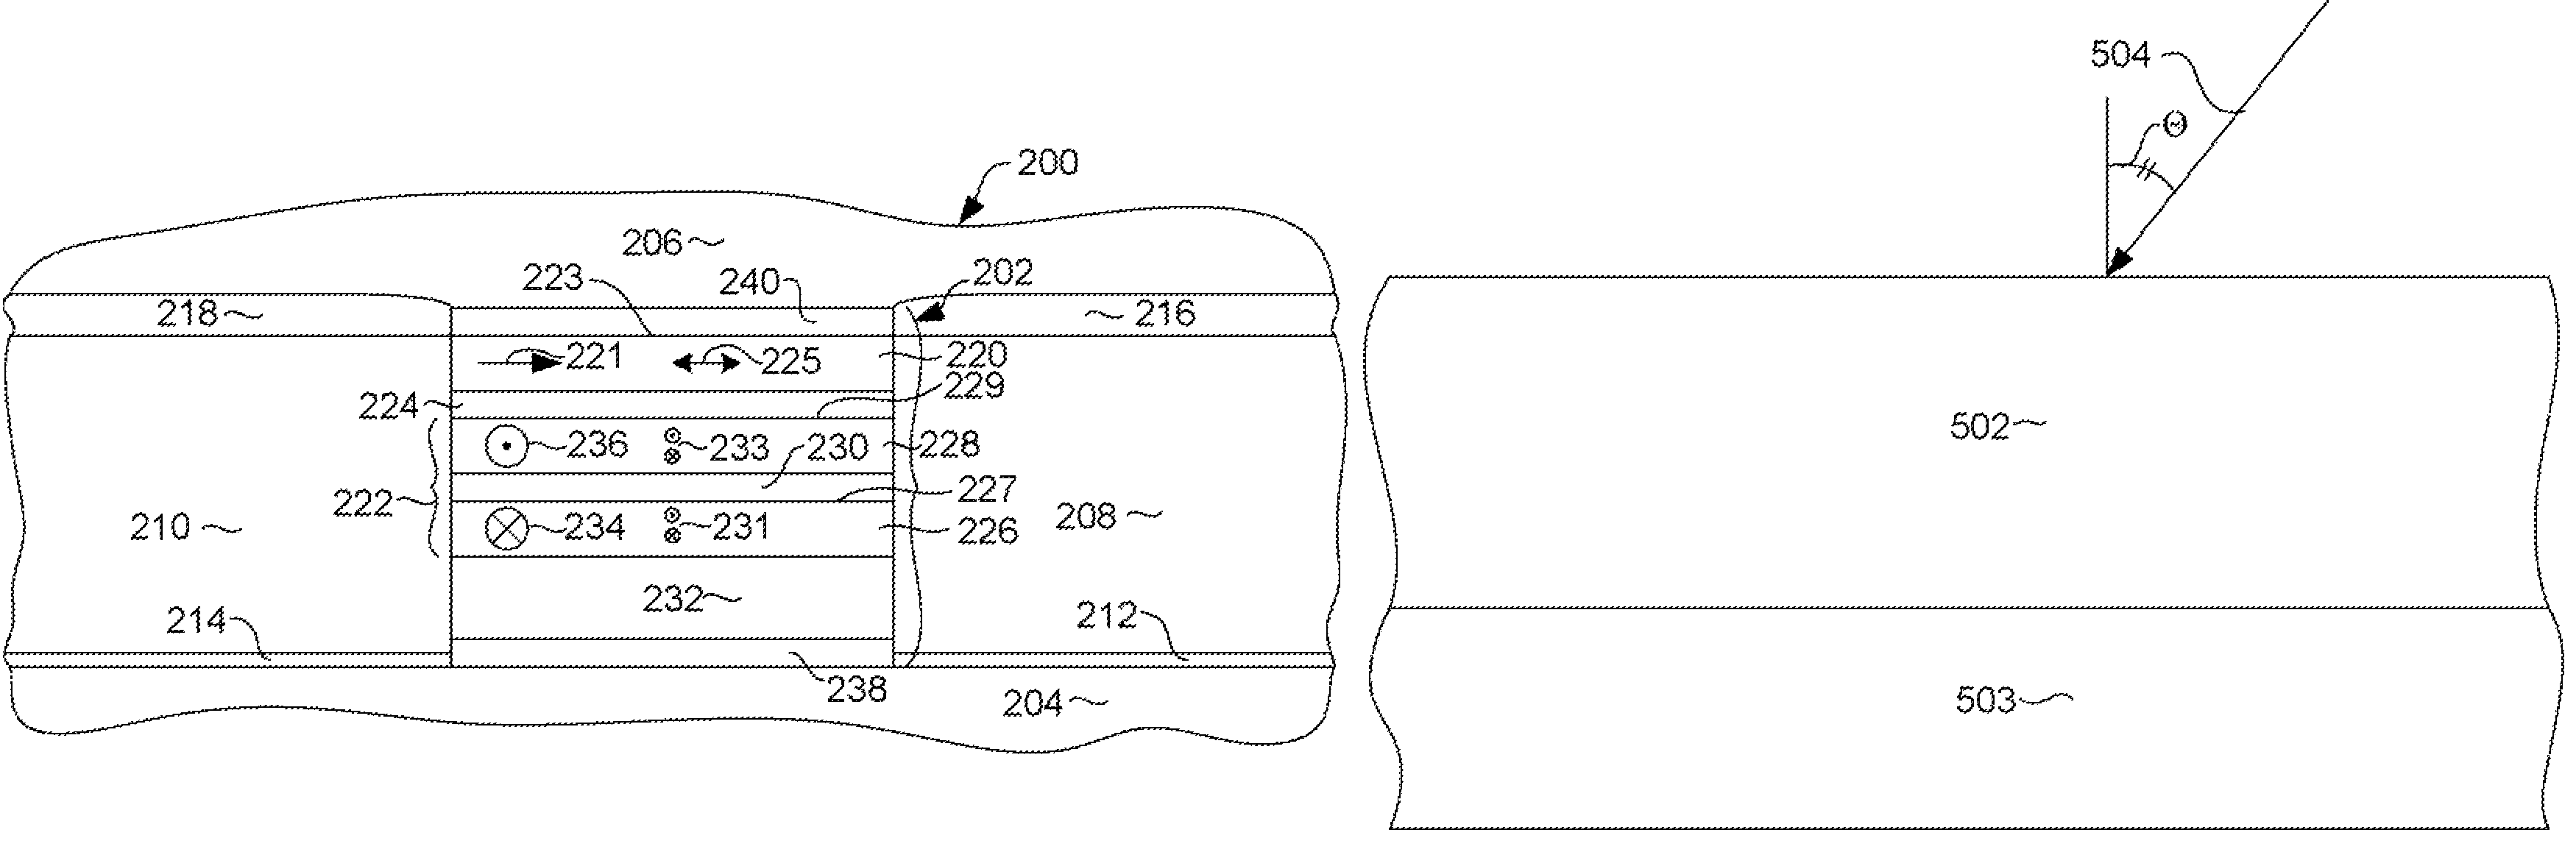 Magnetoresistive sensor having a magnetically stable free layer with a positive magnetostriction